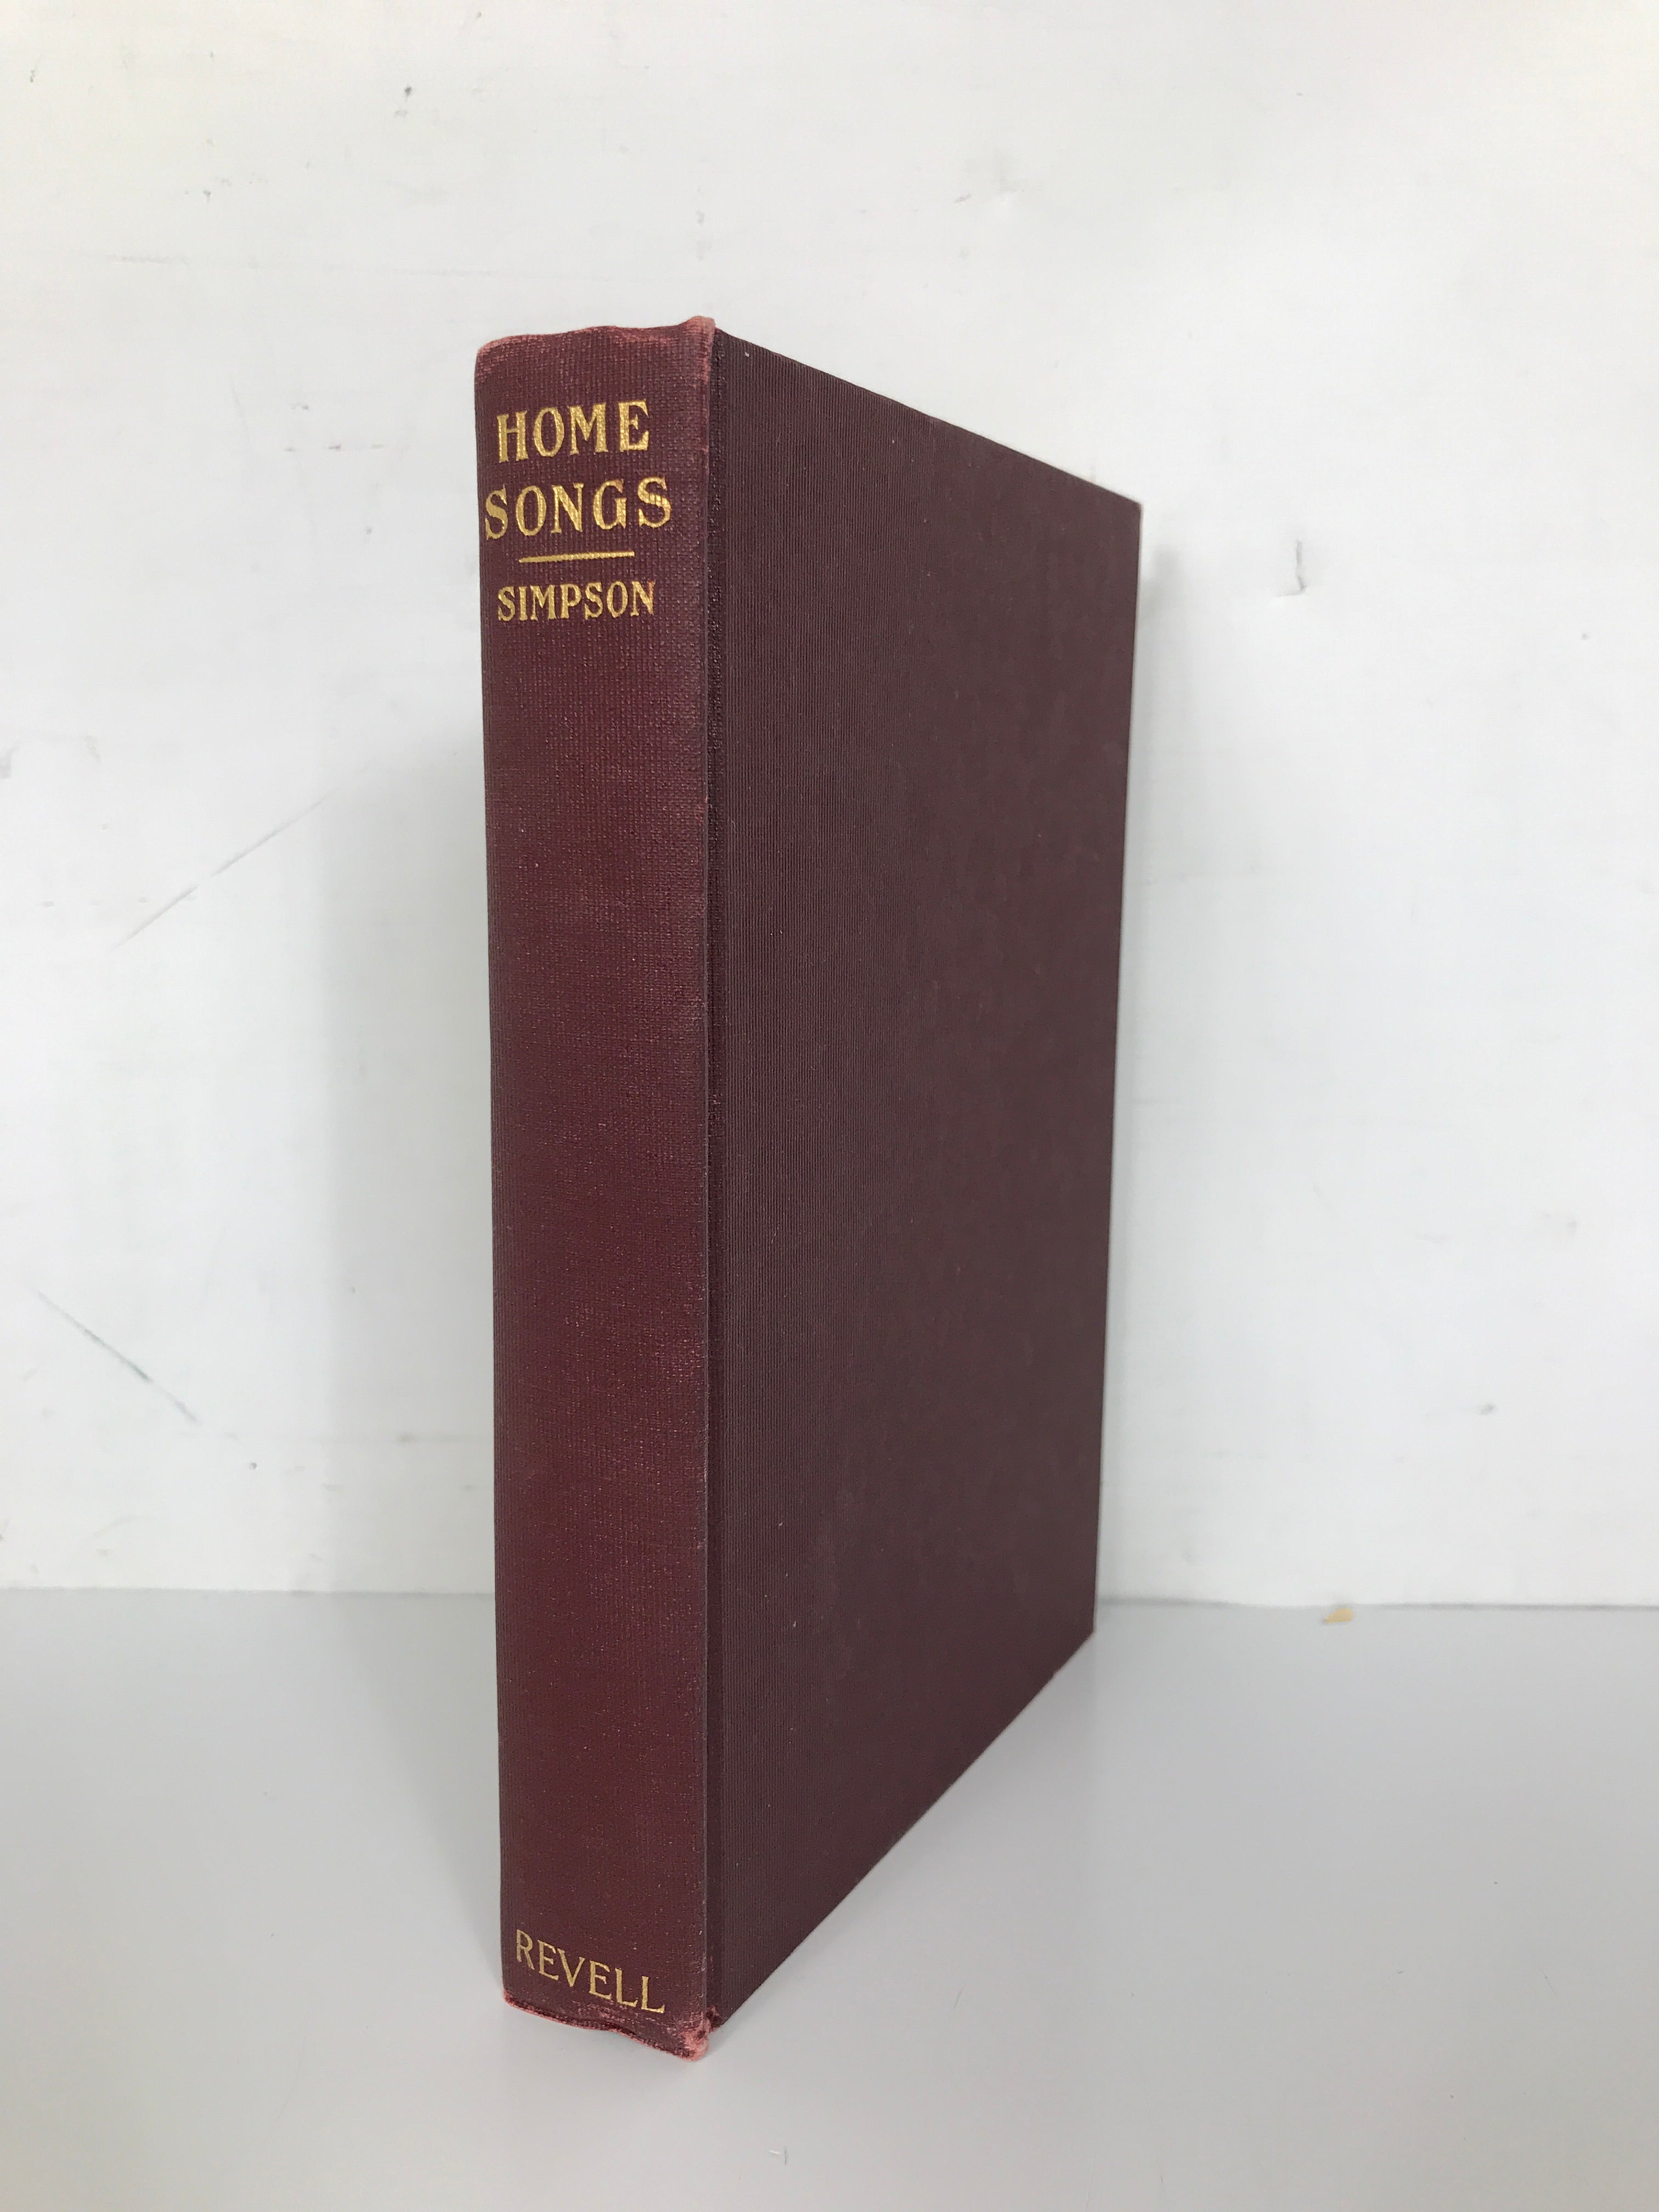 Home Songs by Mary A. Simpson 1903 Book of Poems HC Fleming H. Revell Company